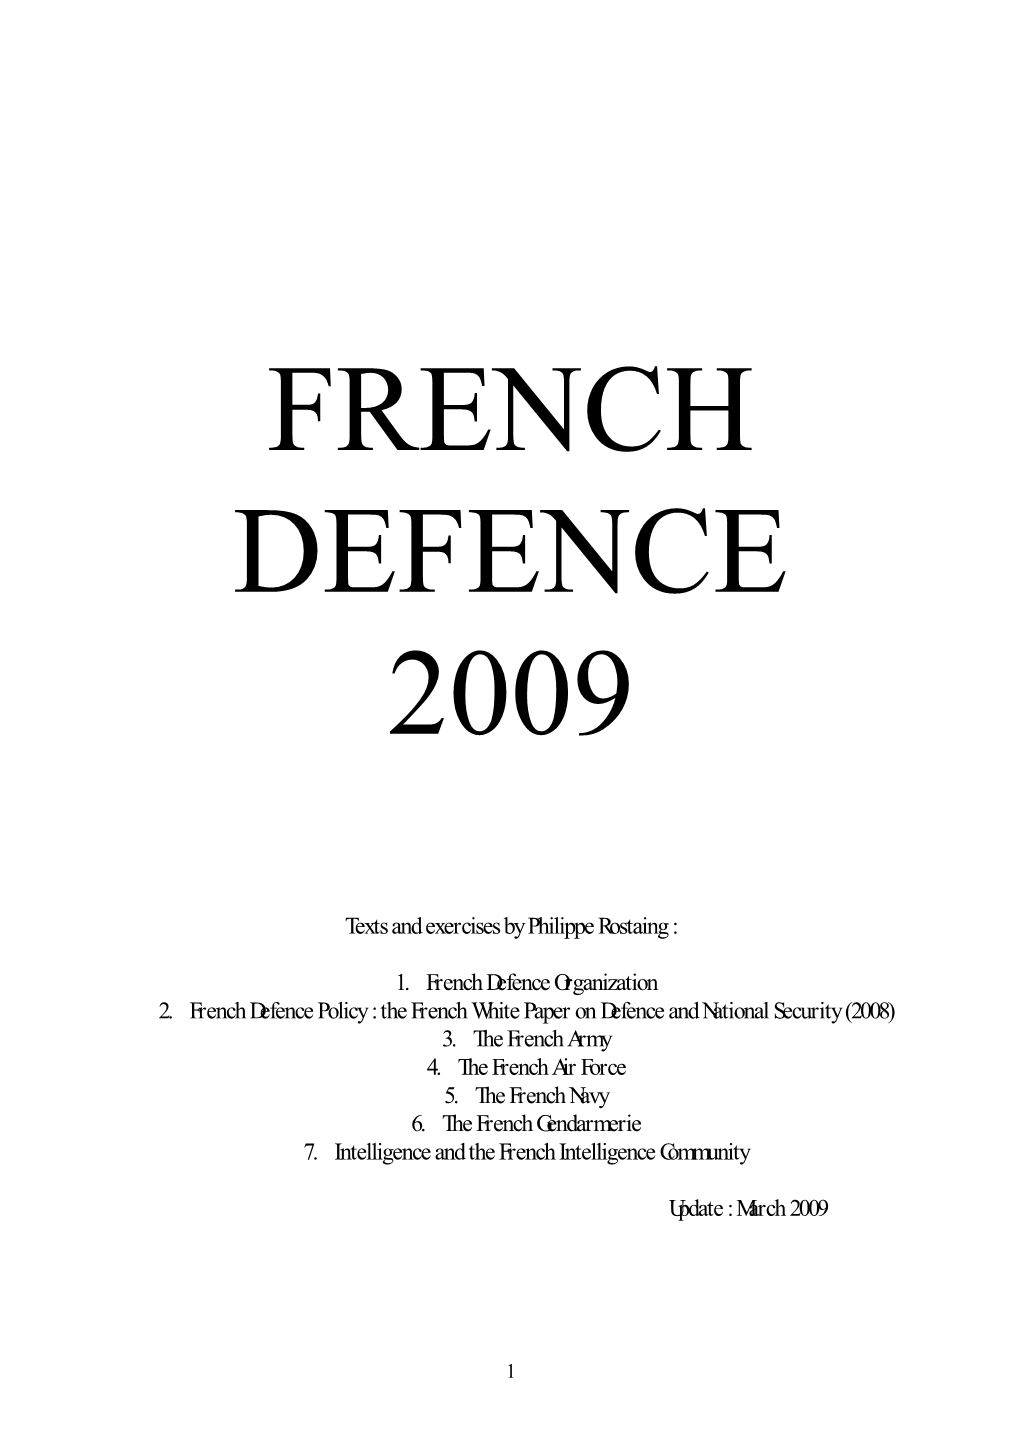 The French White Paper on Defence and National Security (2008) 3